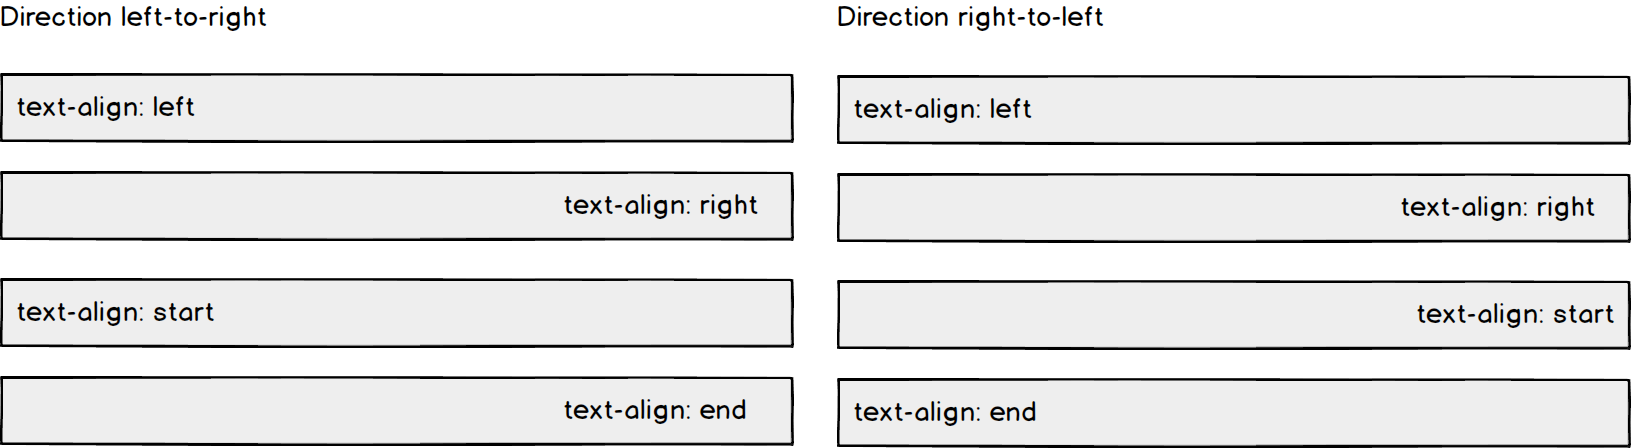 Wireframe showing different text alignment options